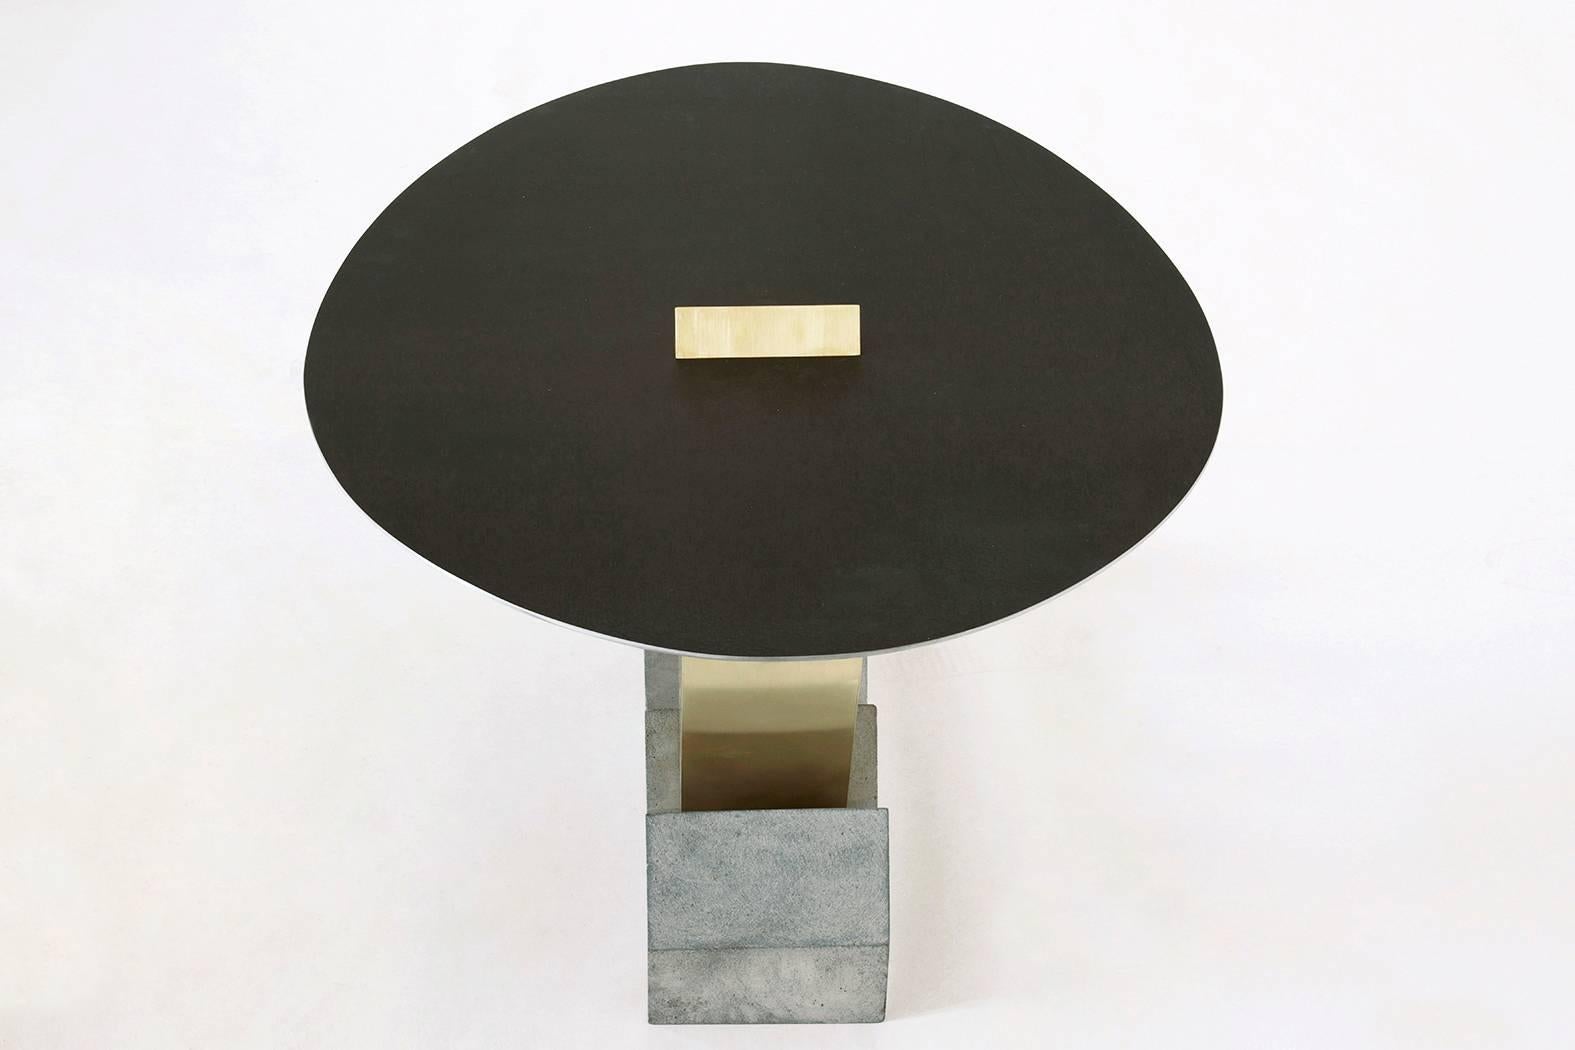 Modular sculptural coffee table N.I, Rooms
Dimensions: L 80, W 69cm, H 53cm
Materials: Brass/Metal/Stone/Store

Modular coffee table I

Radical in its form, “Rooms” modular coffee table N1 is made with the basic materials such as brass, metal